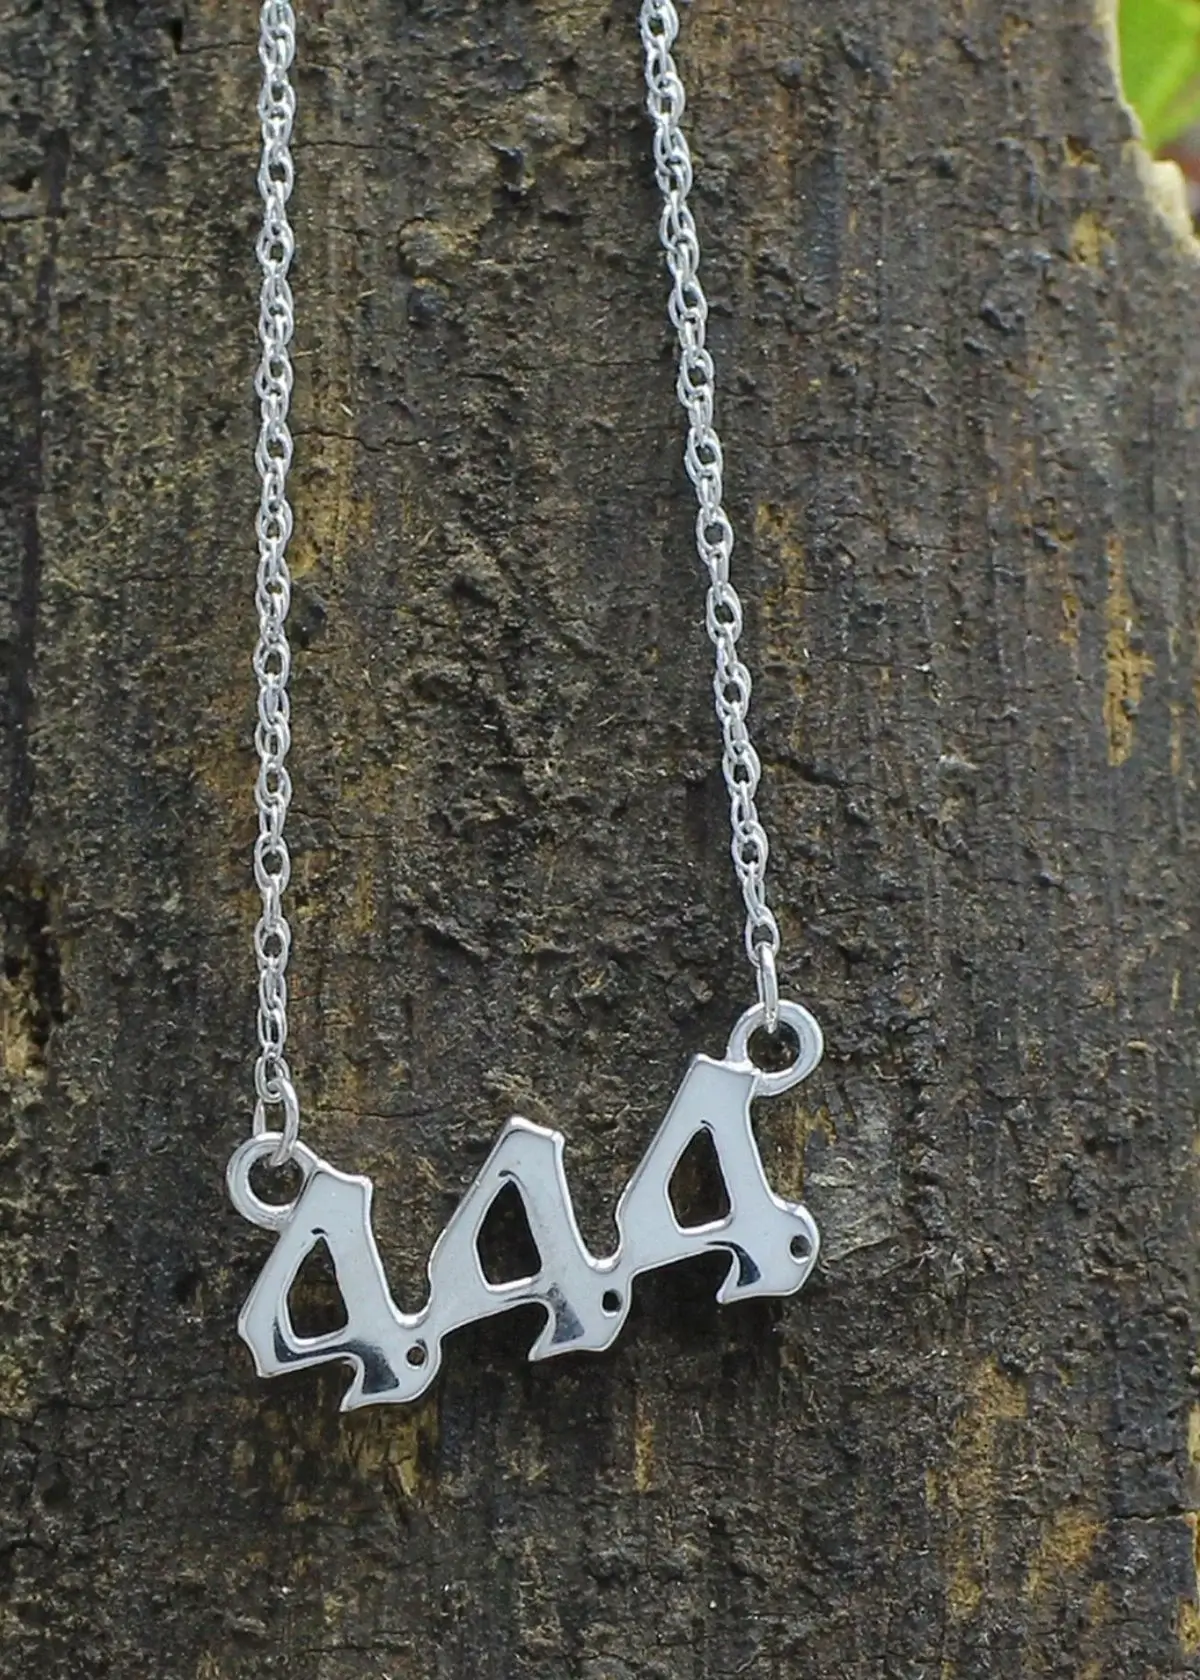 444 necklace